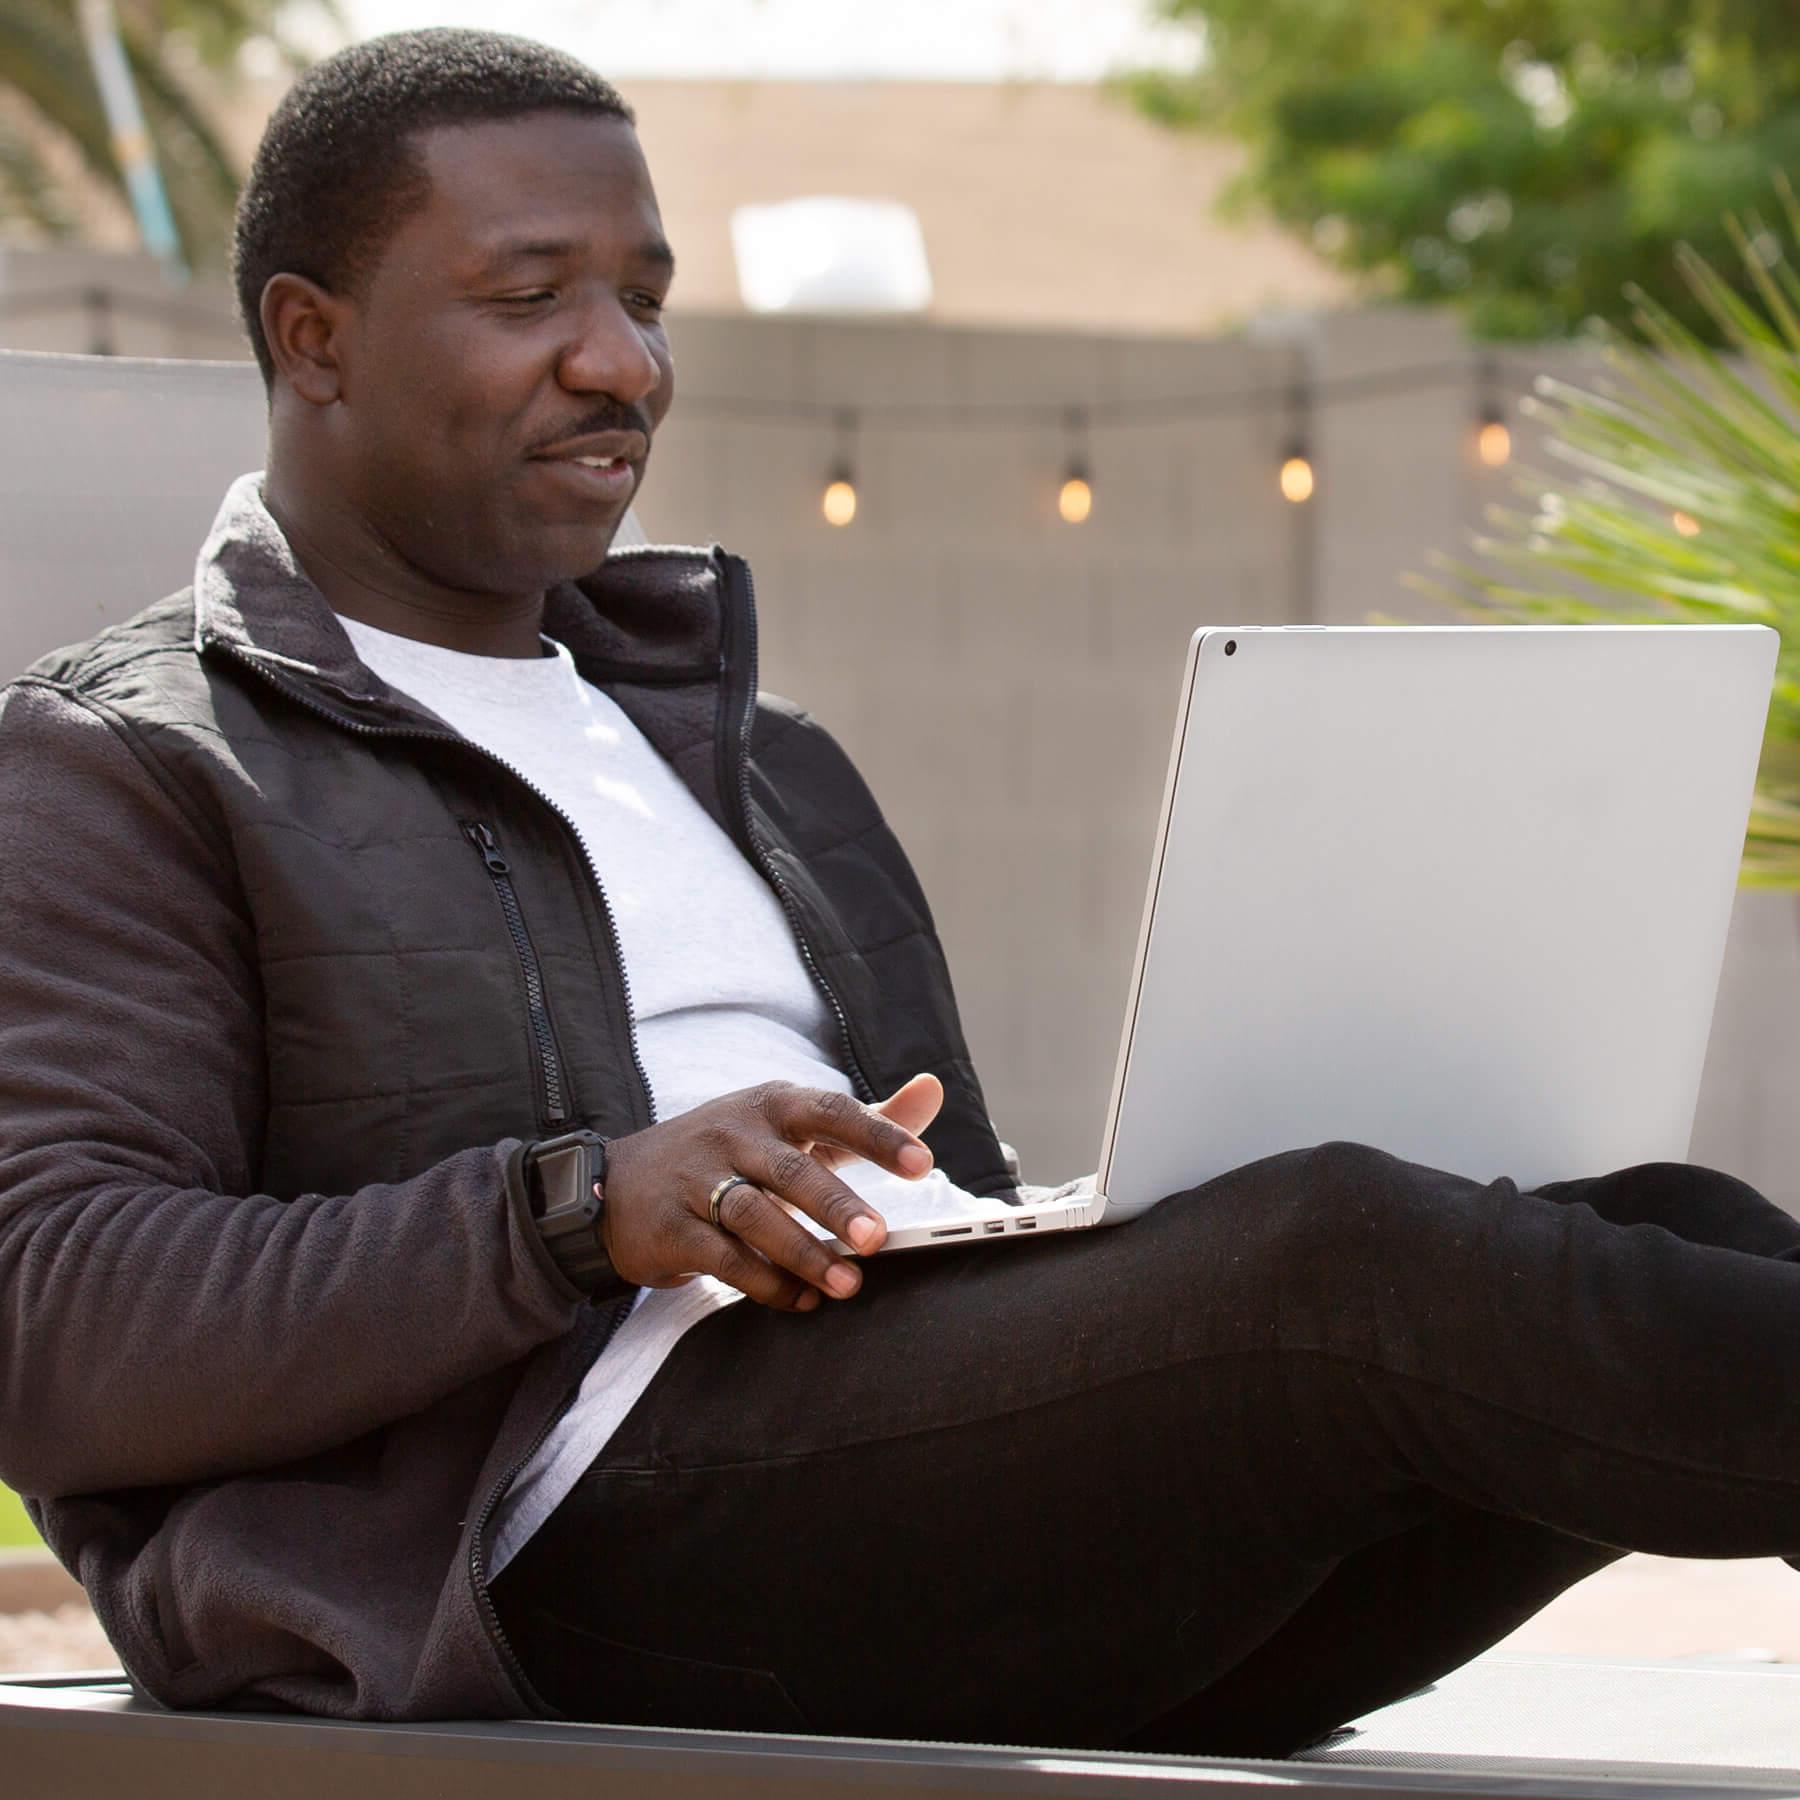 Jahmar Robinson studying on his laptop, outside on a patio